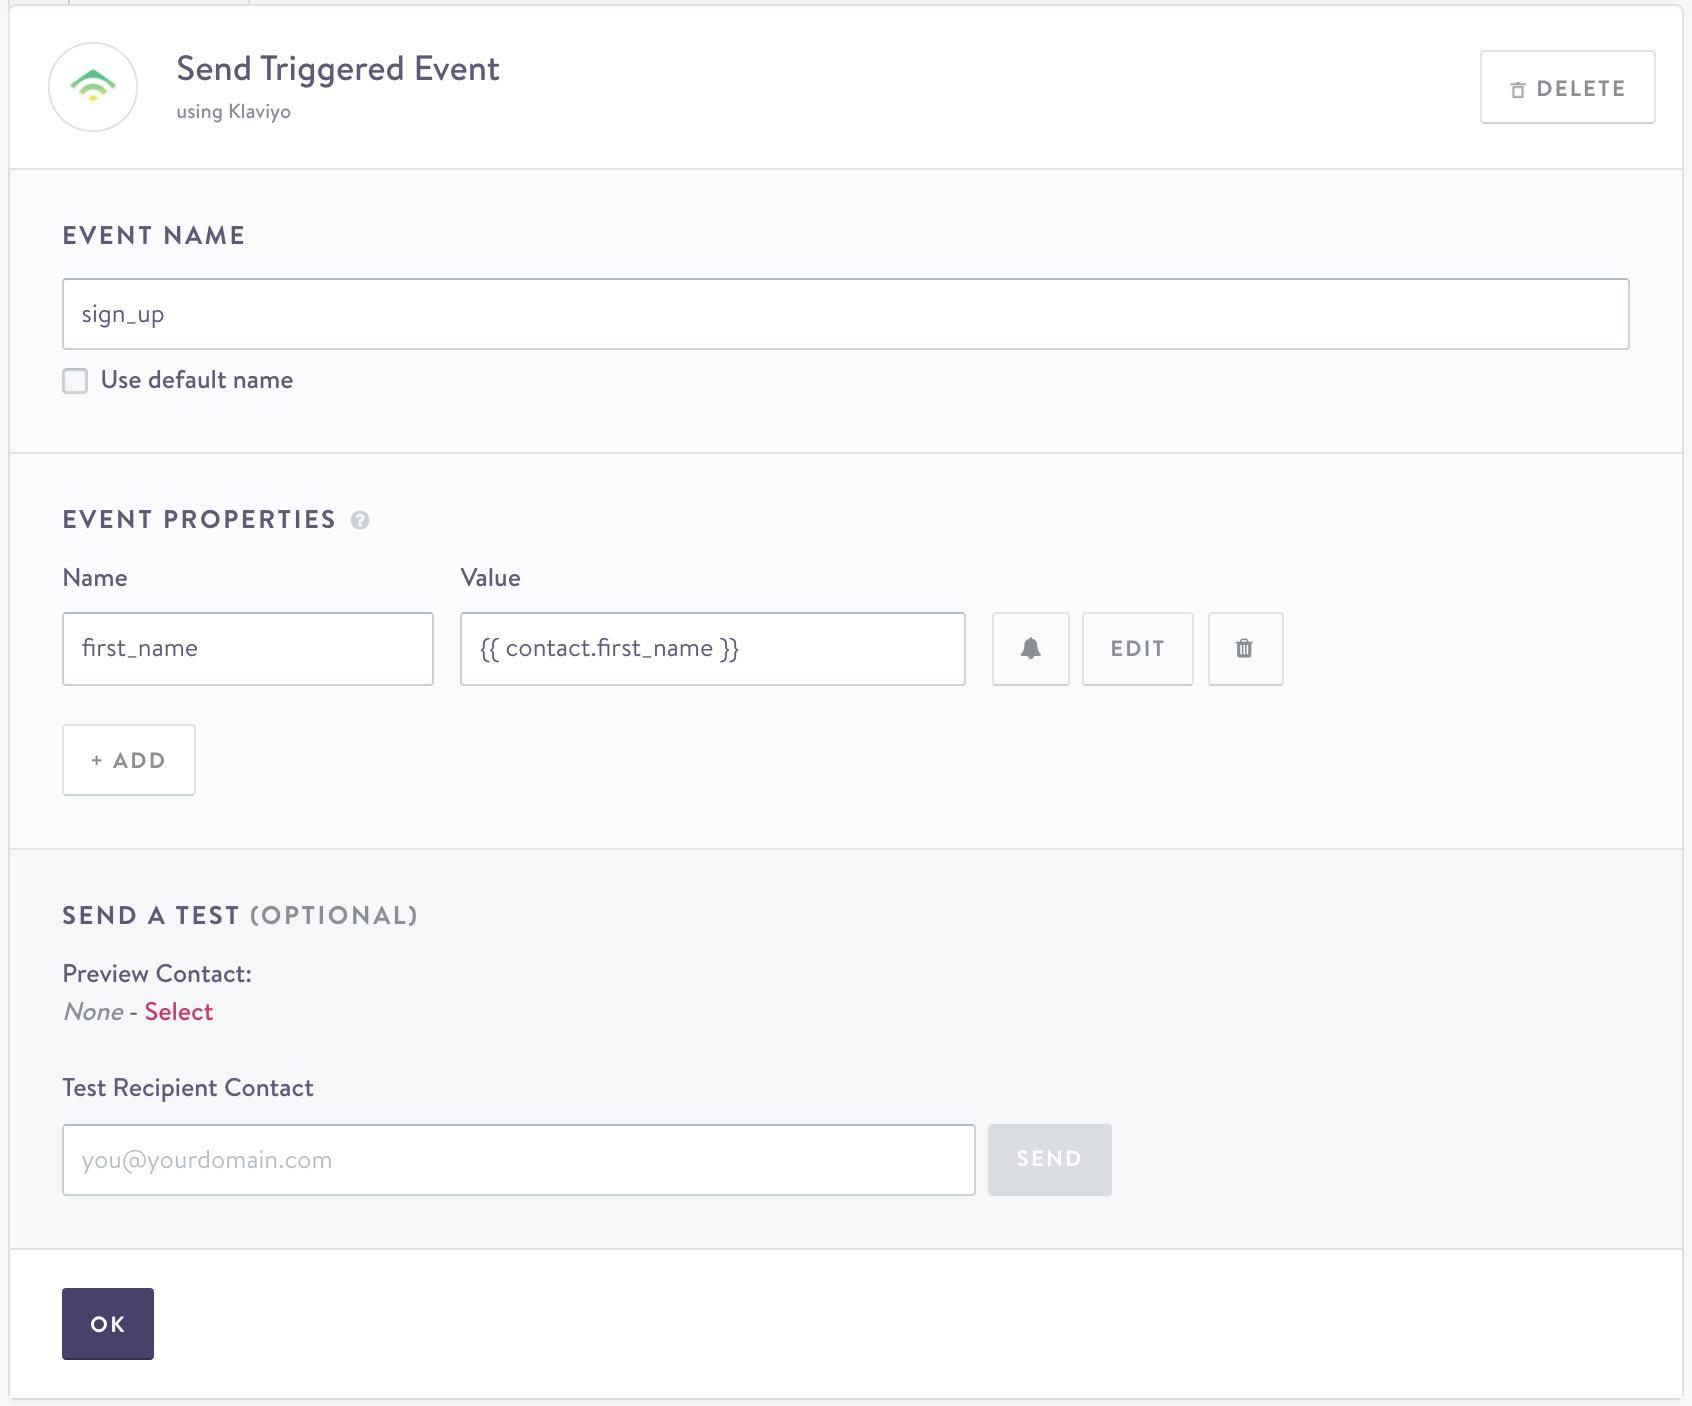 Using a custom event name and event properties in Klaviyo.